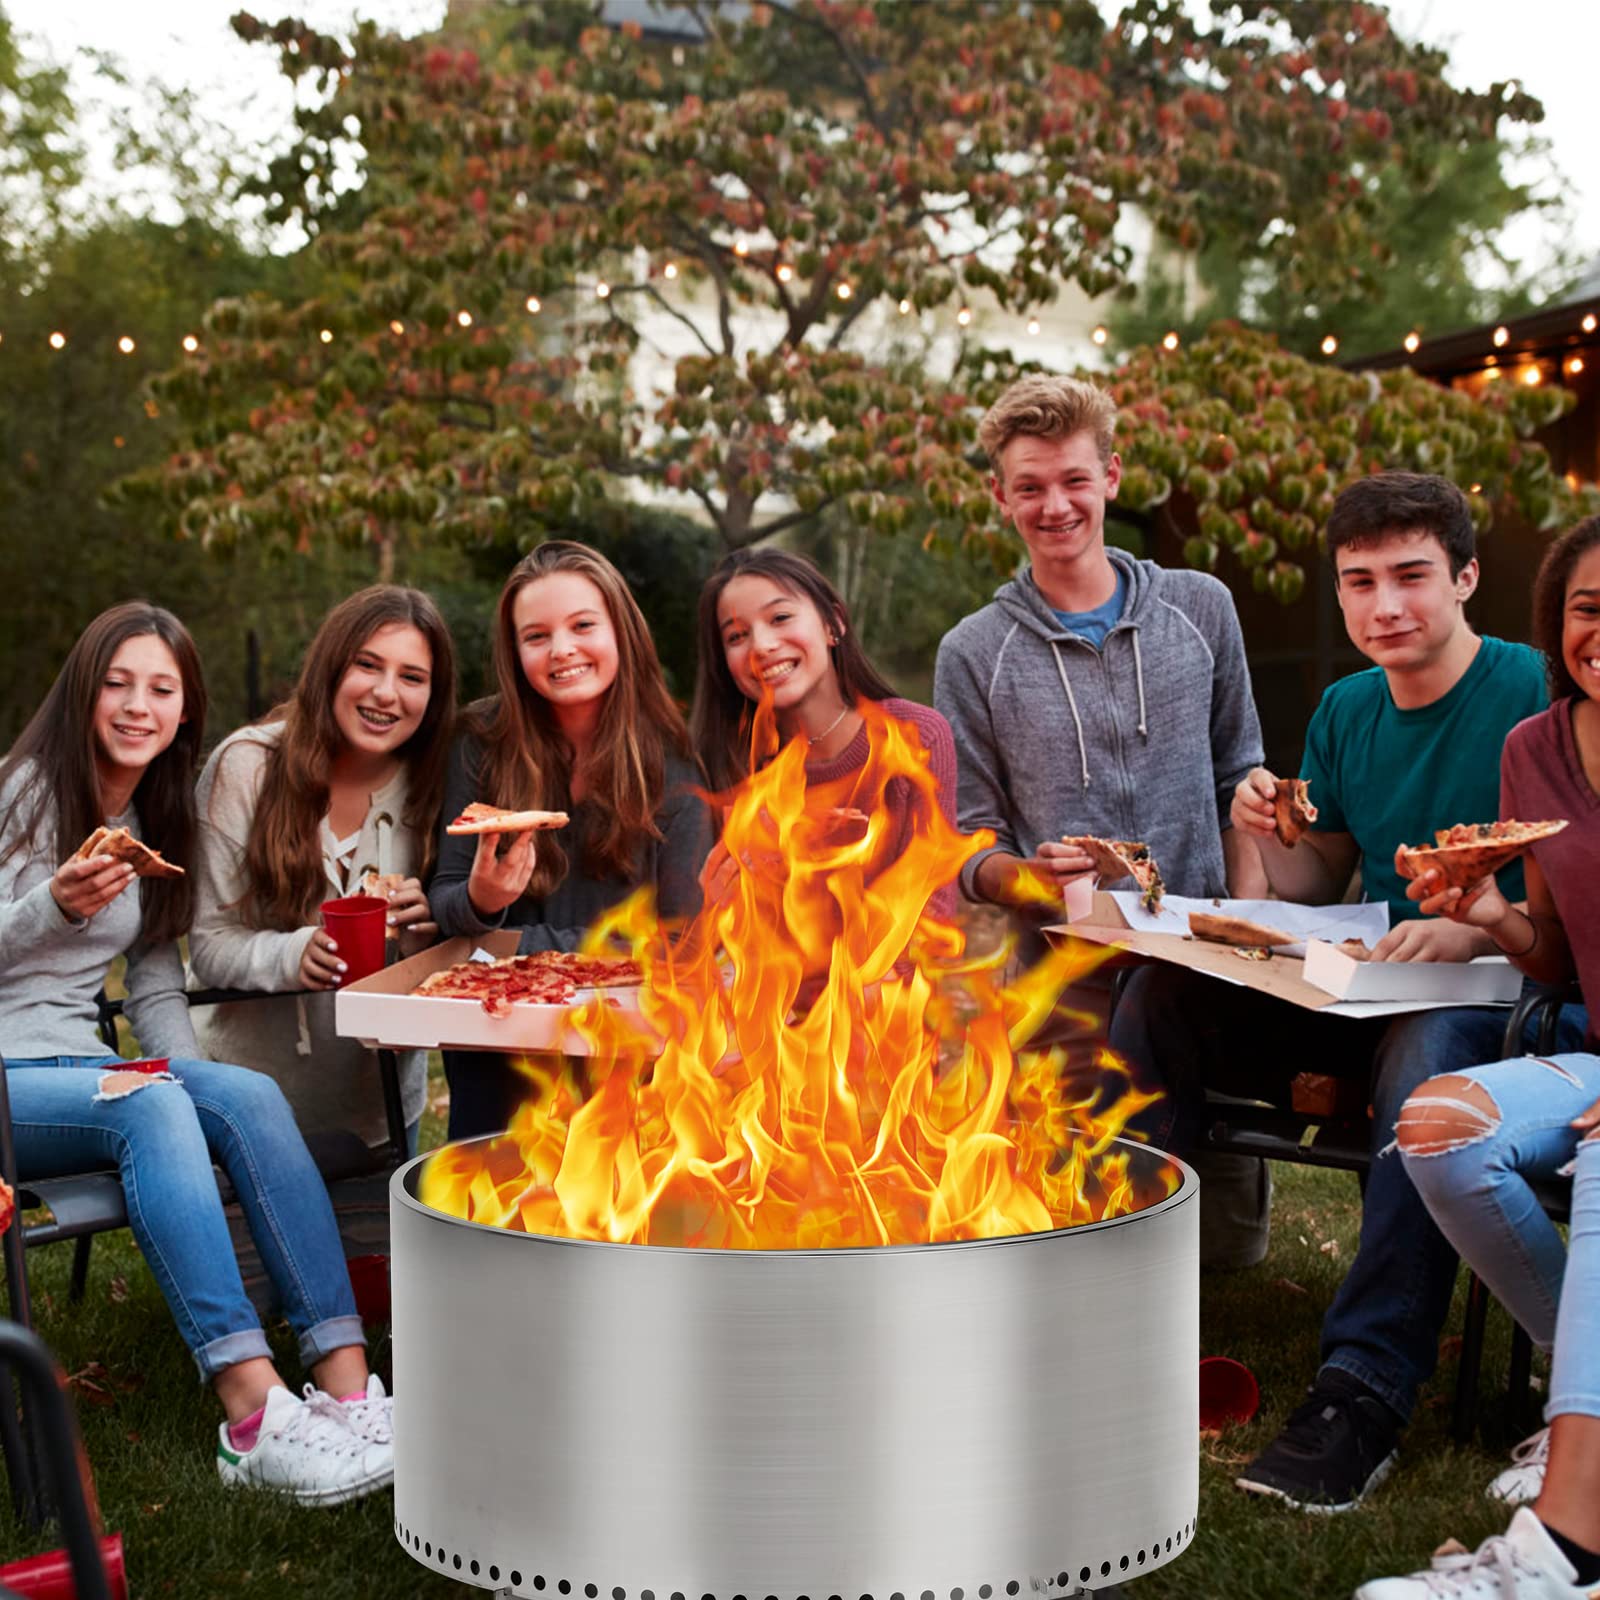 27 Inch Smokeless Fire Pit for Outdoor Wood Burning Portable Stainless Steel Camping Stove With Stand